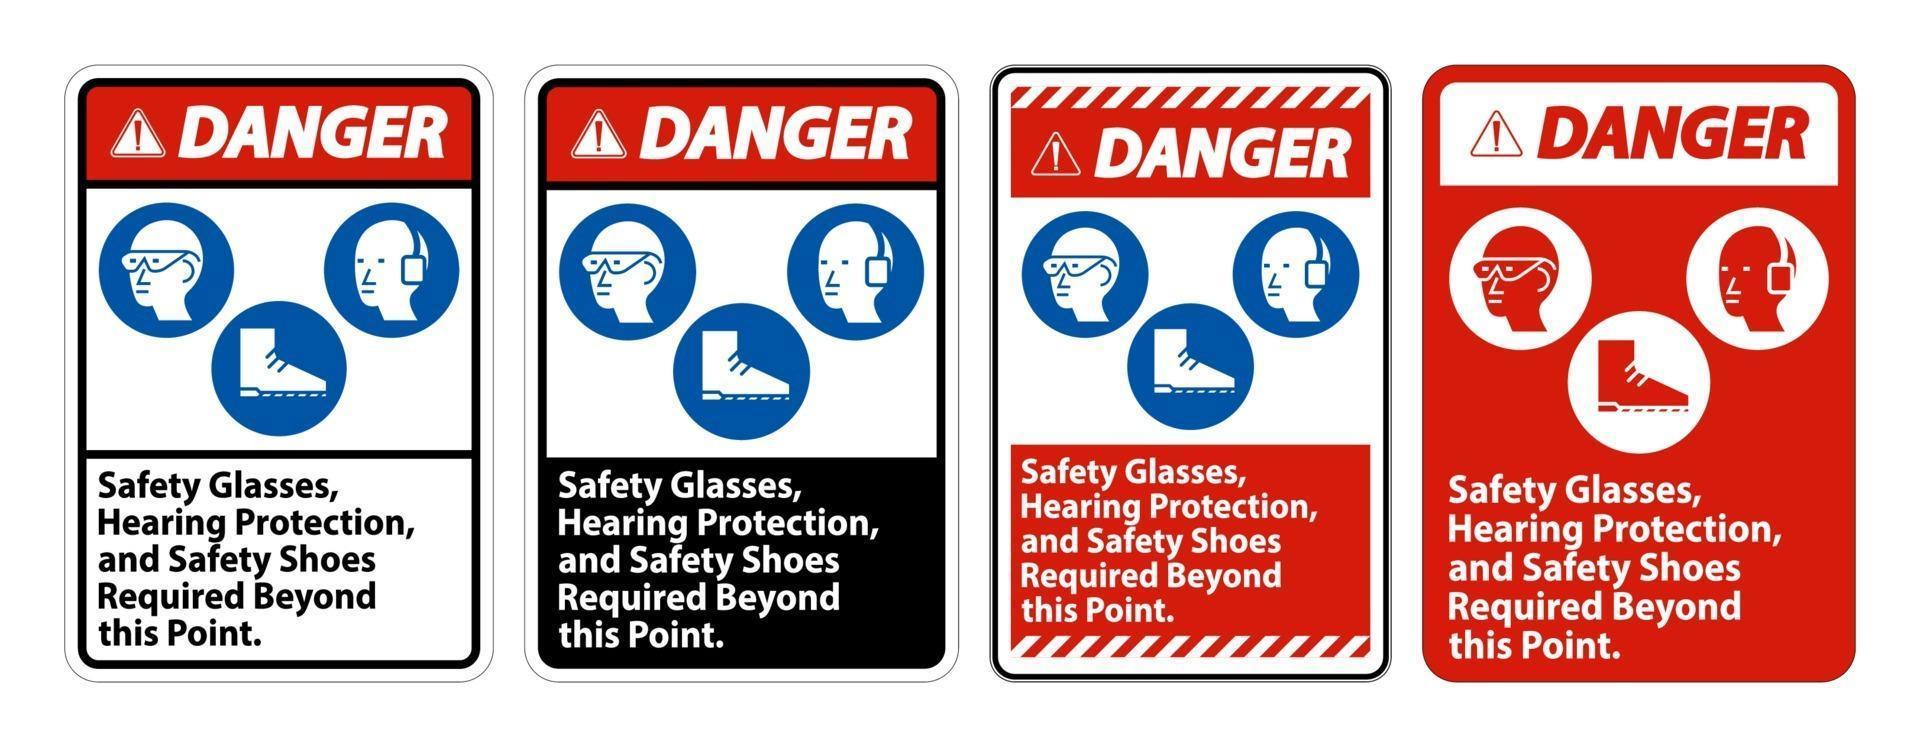 Danger Sign Safety Glasses Hearing Protection And Safety Shoes Required Beyond This Point on white background vector